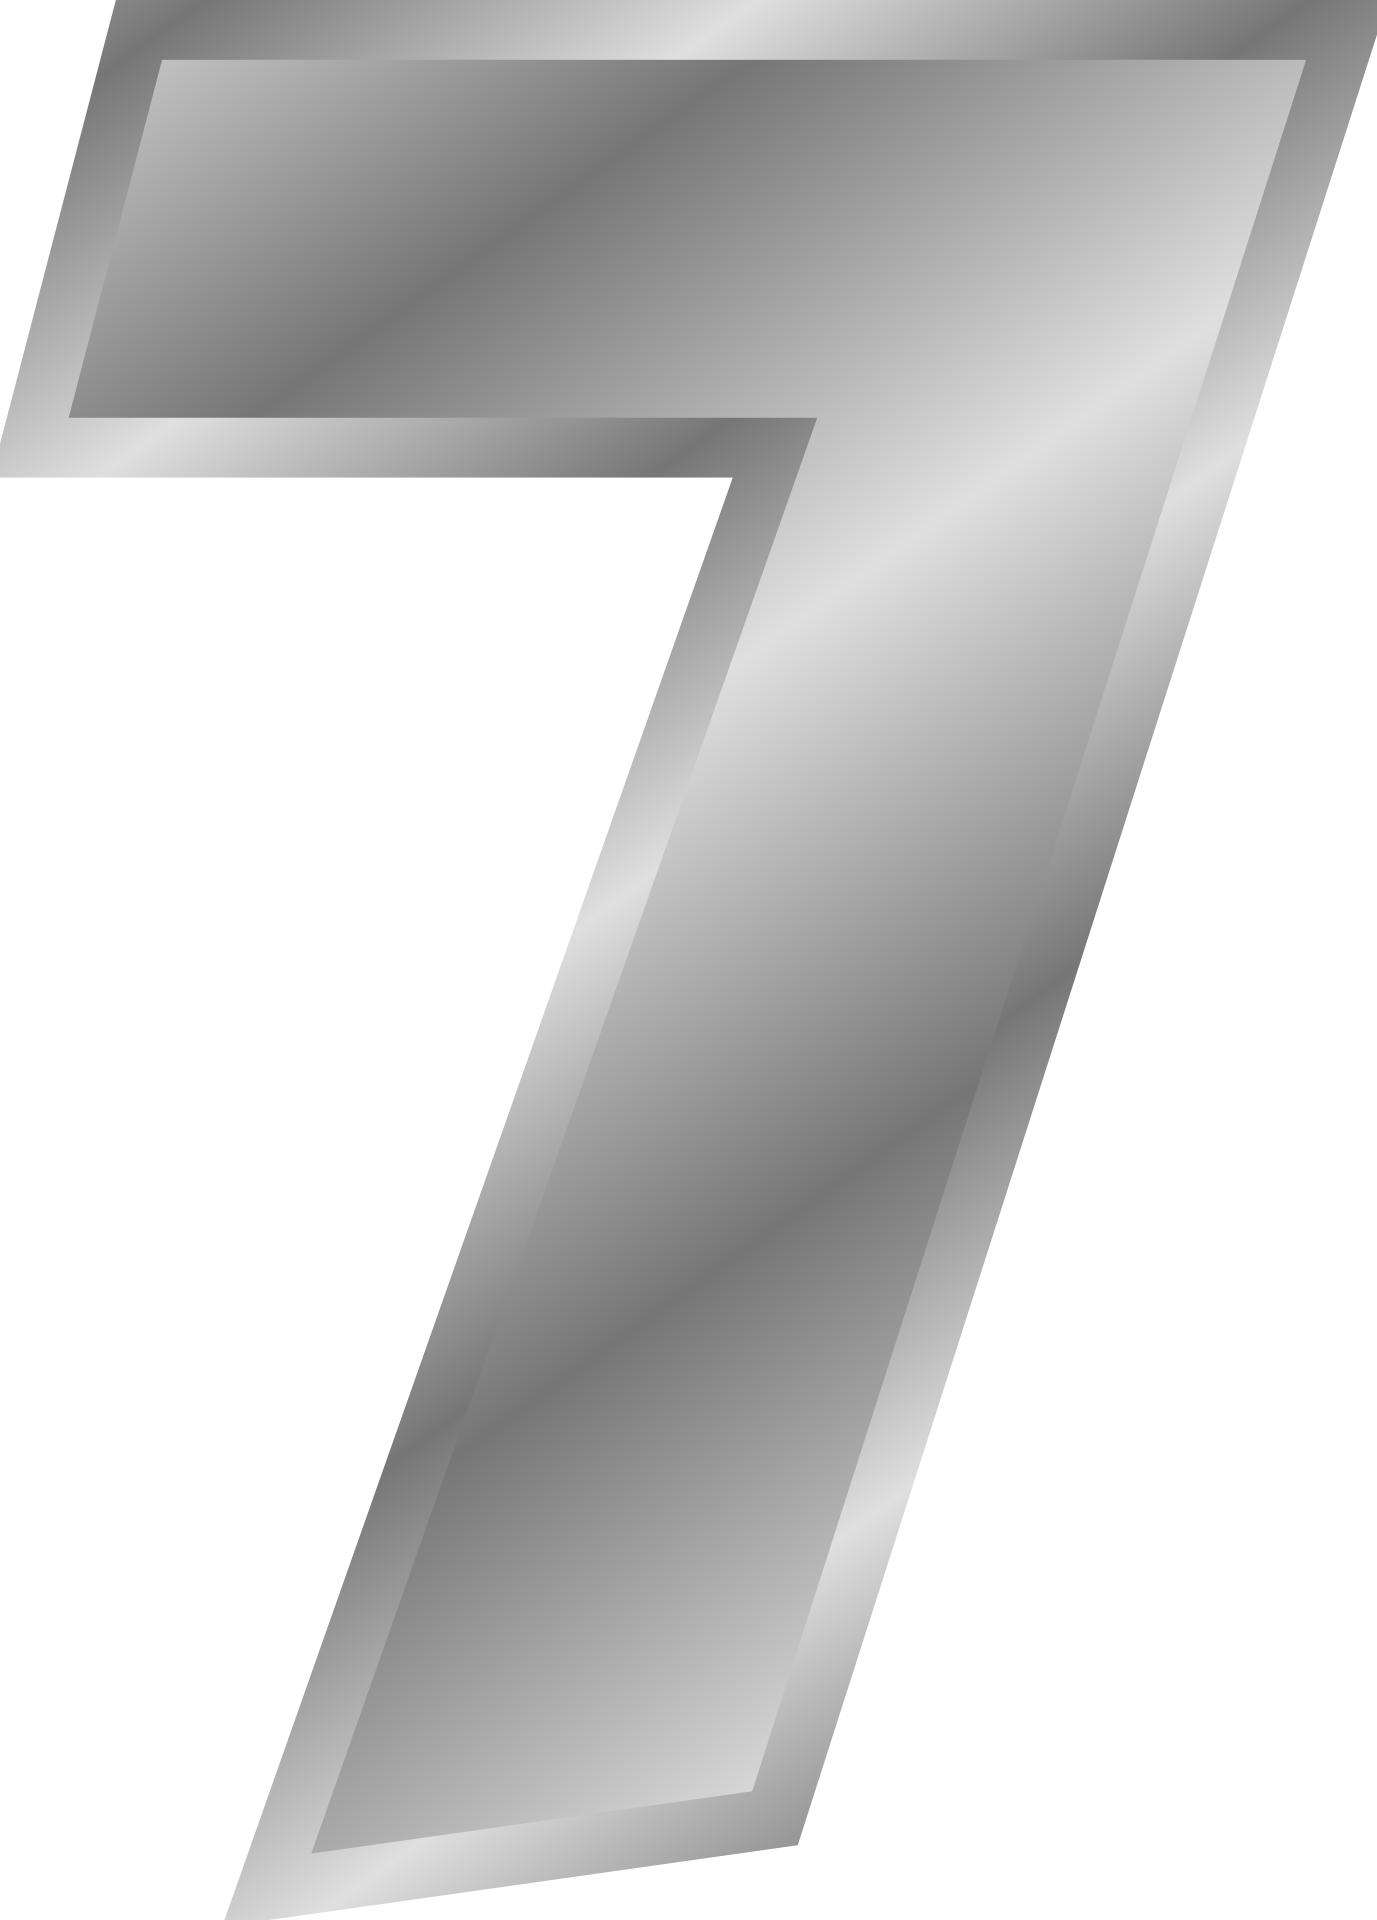 number-6-and-7-in